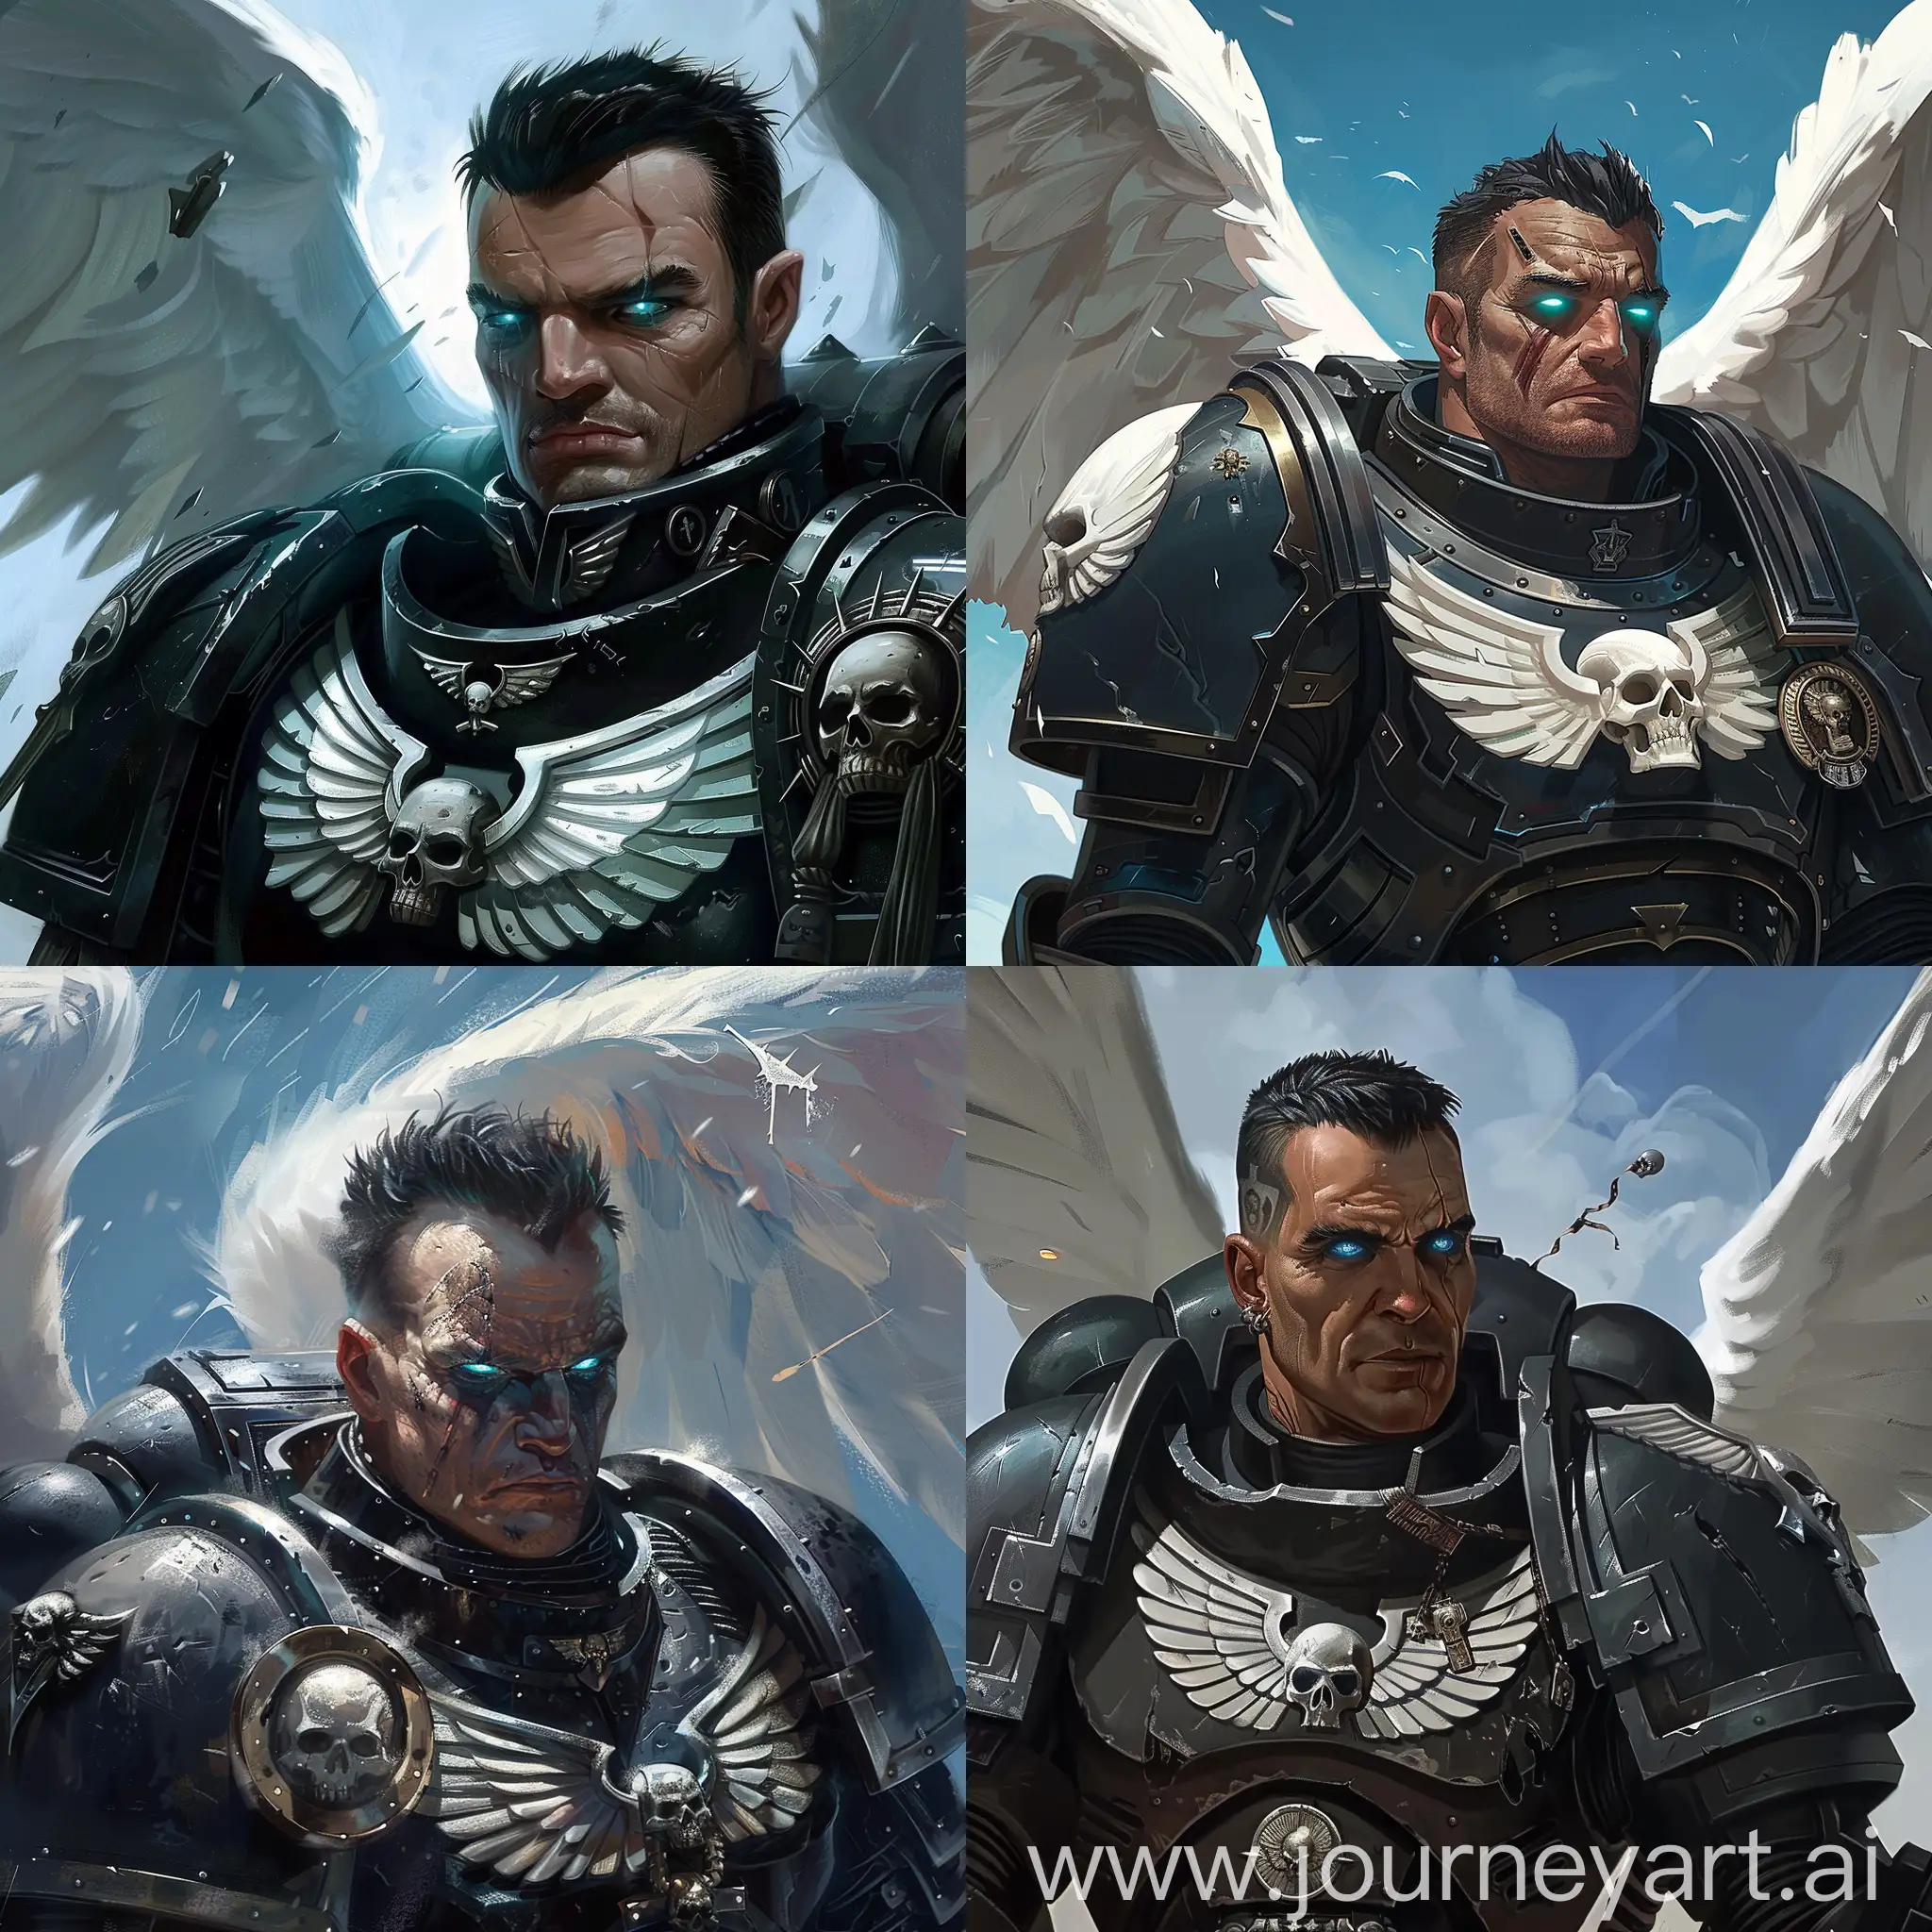 Powerful-Space-Marine-Warrior-with-Luminous-Wings-and-Sword-in-Blue-Sky